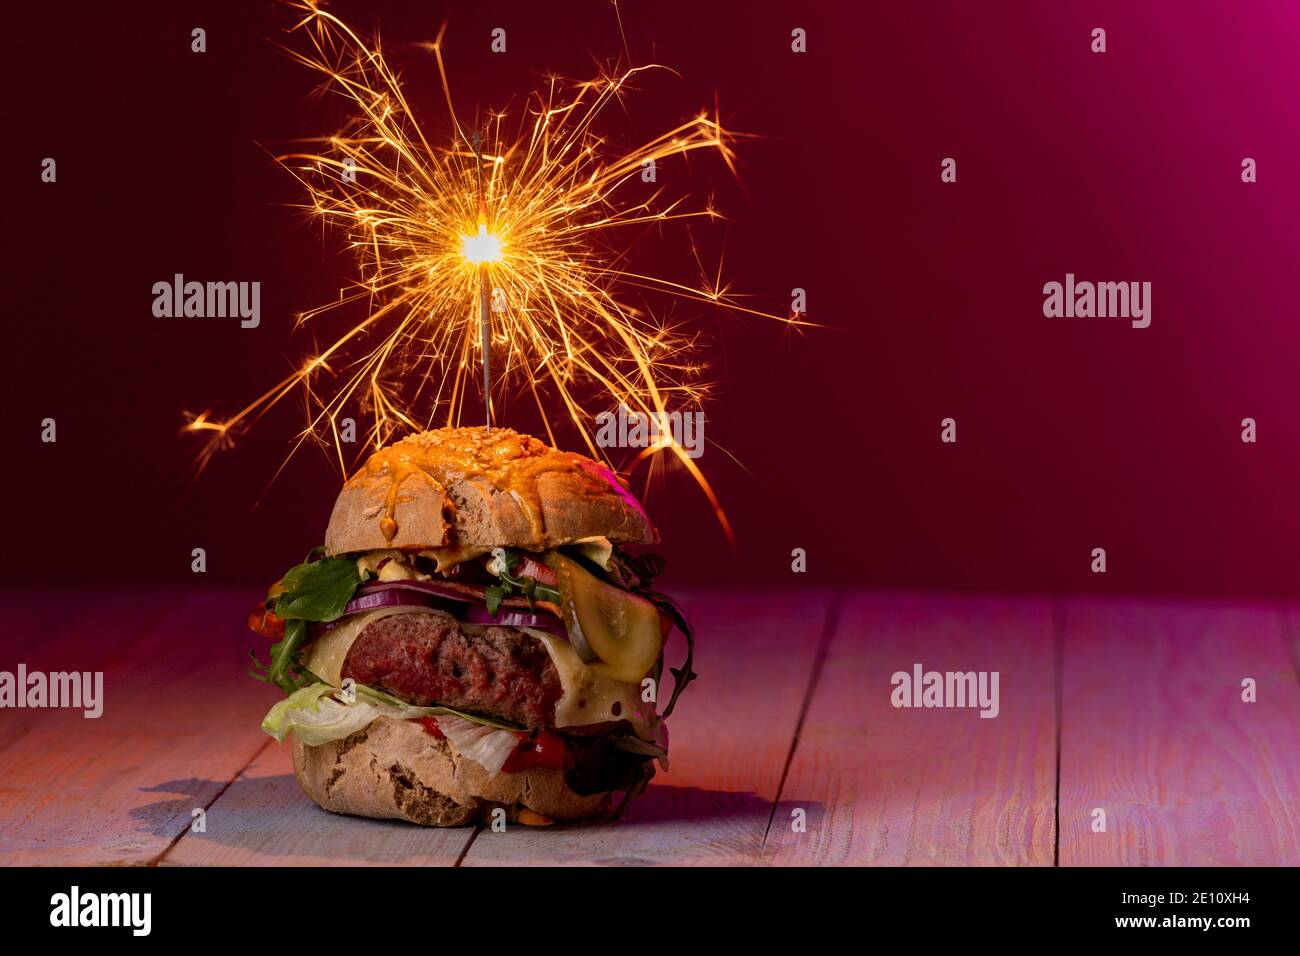 Cheeseburger With A Candle Stock Photo